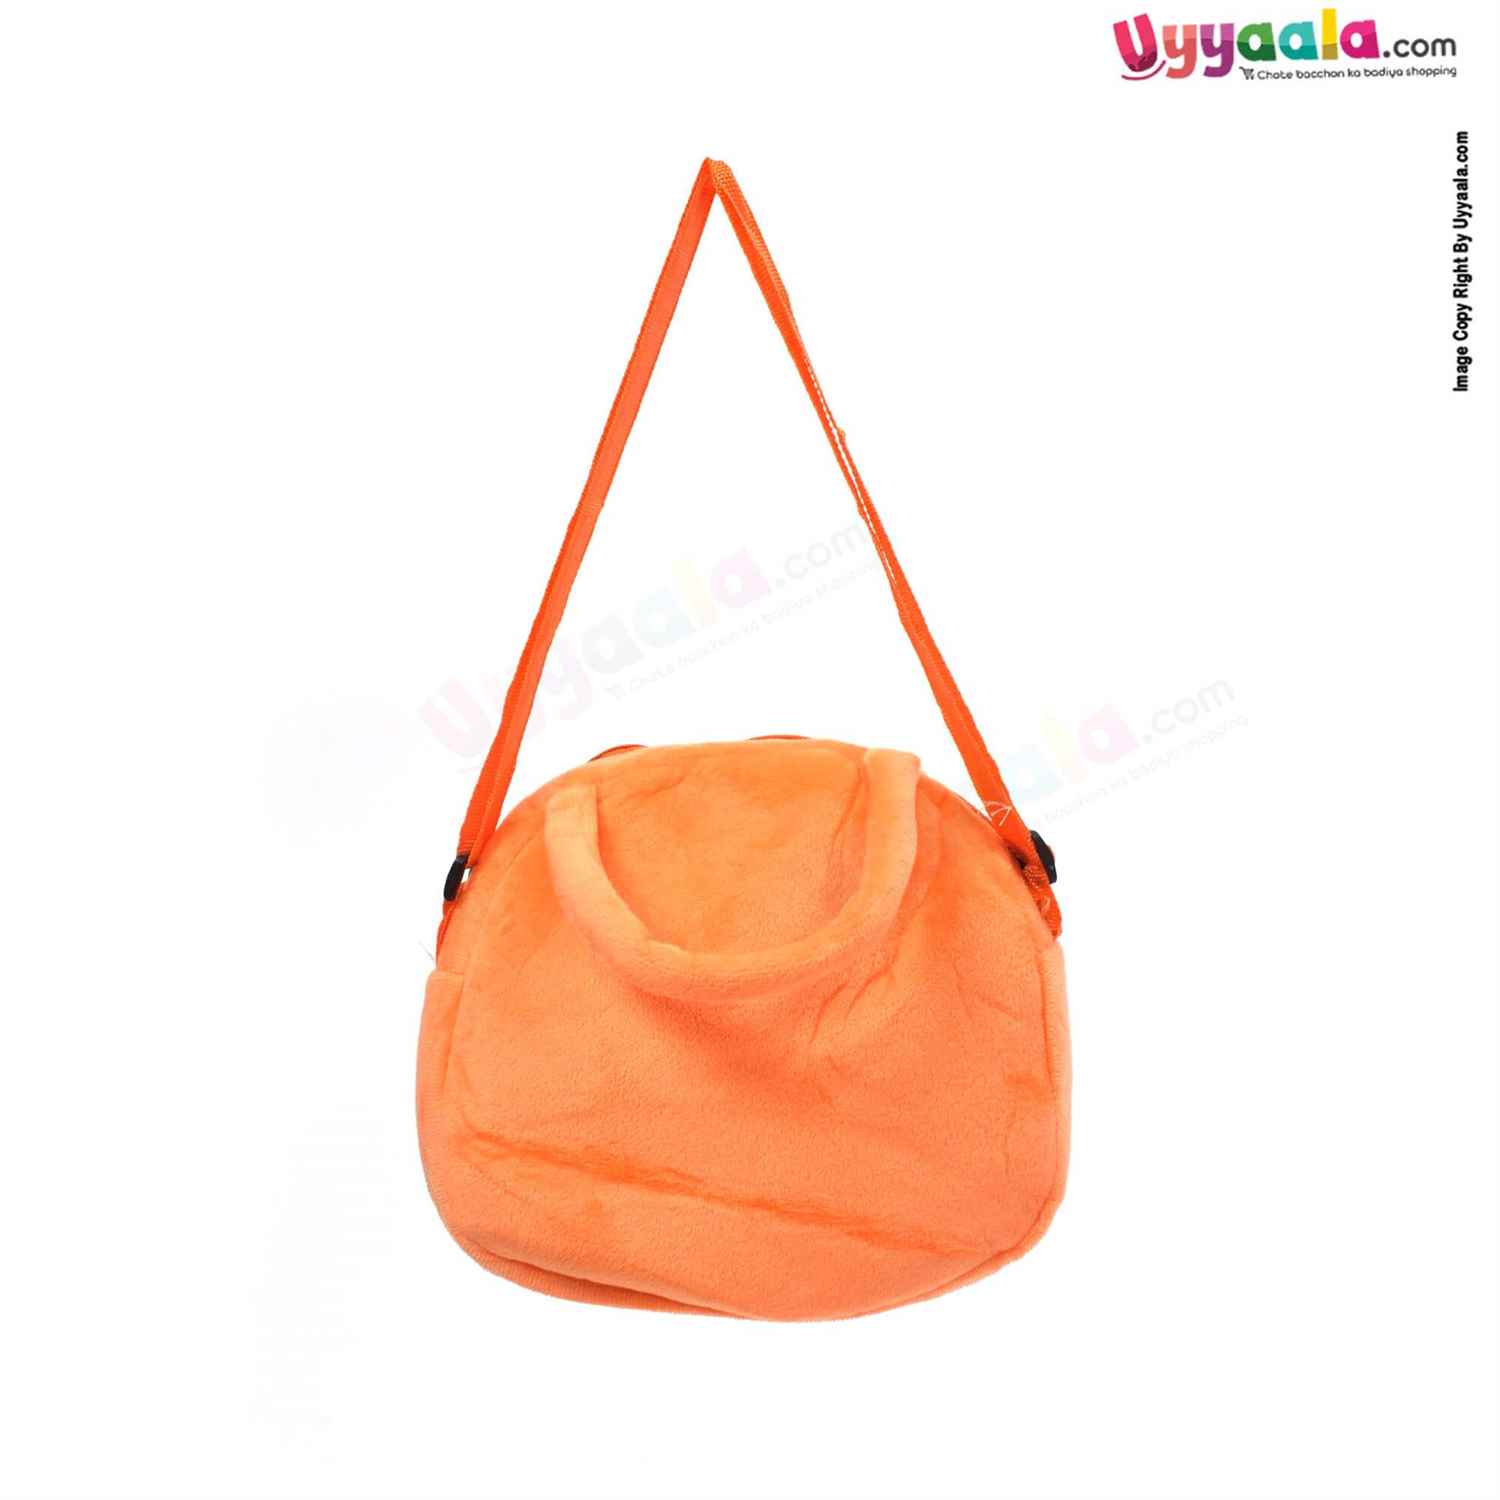 Doggy Themed Soft Hand Bag for Kids - Orange, Brown